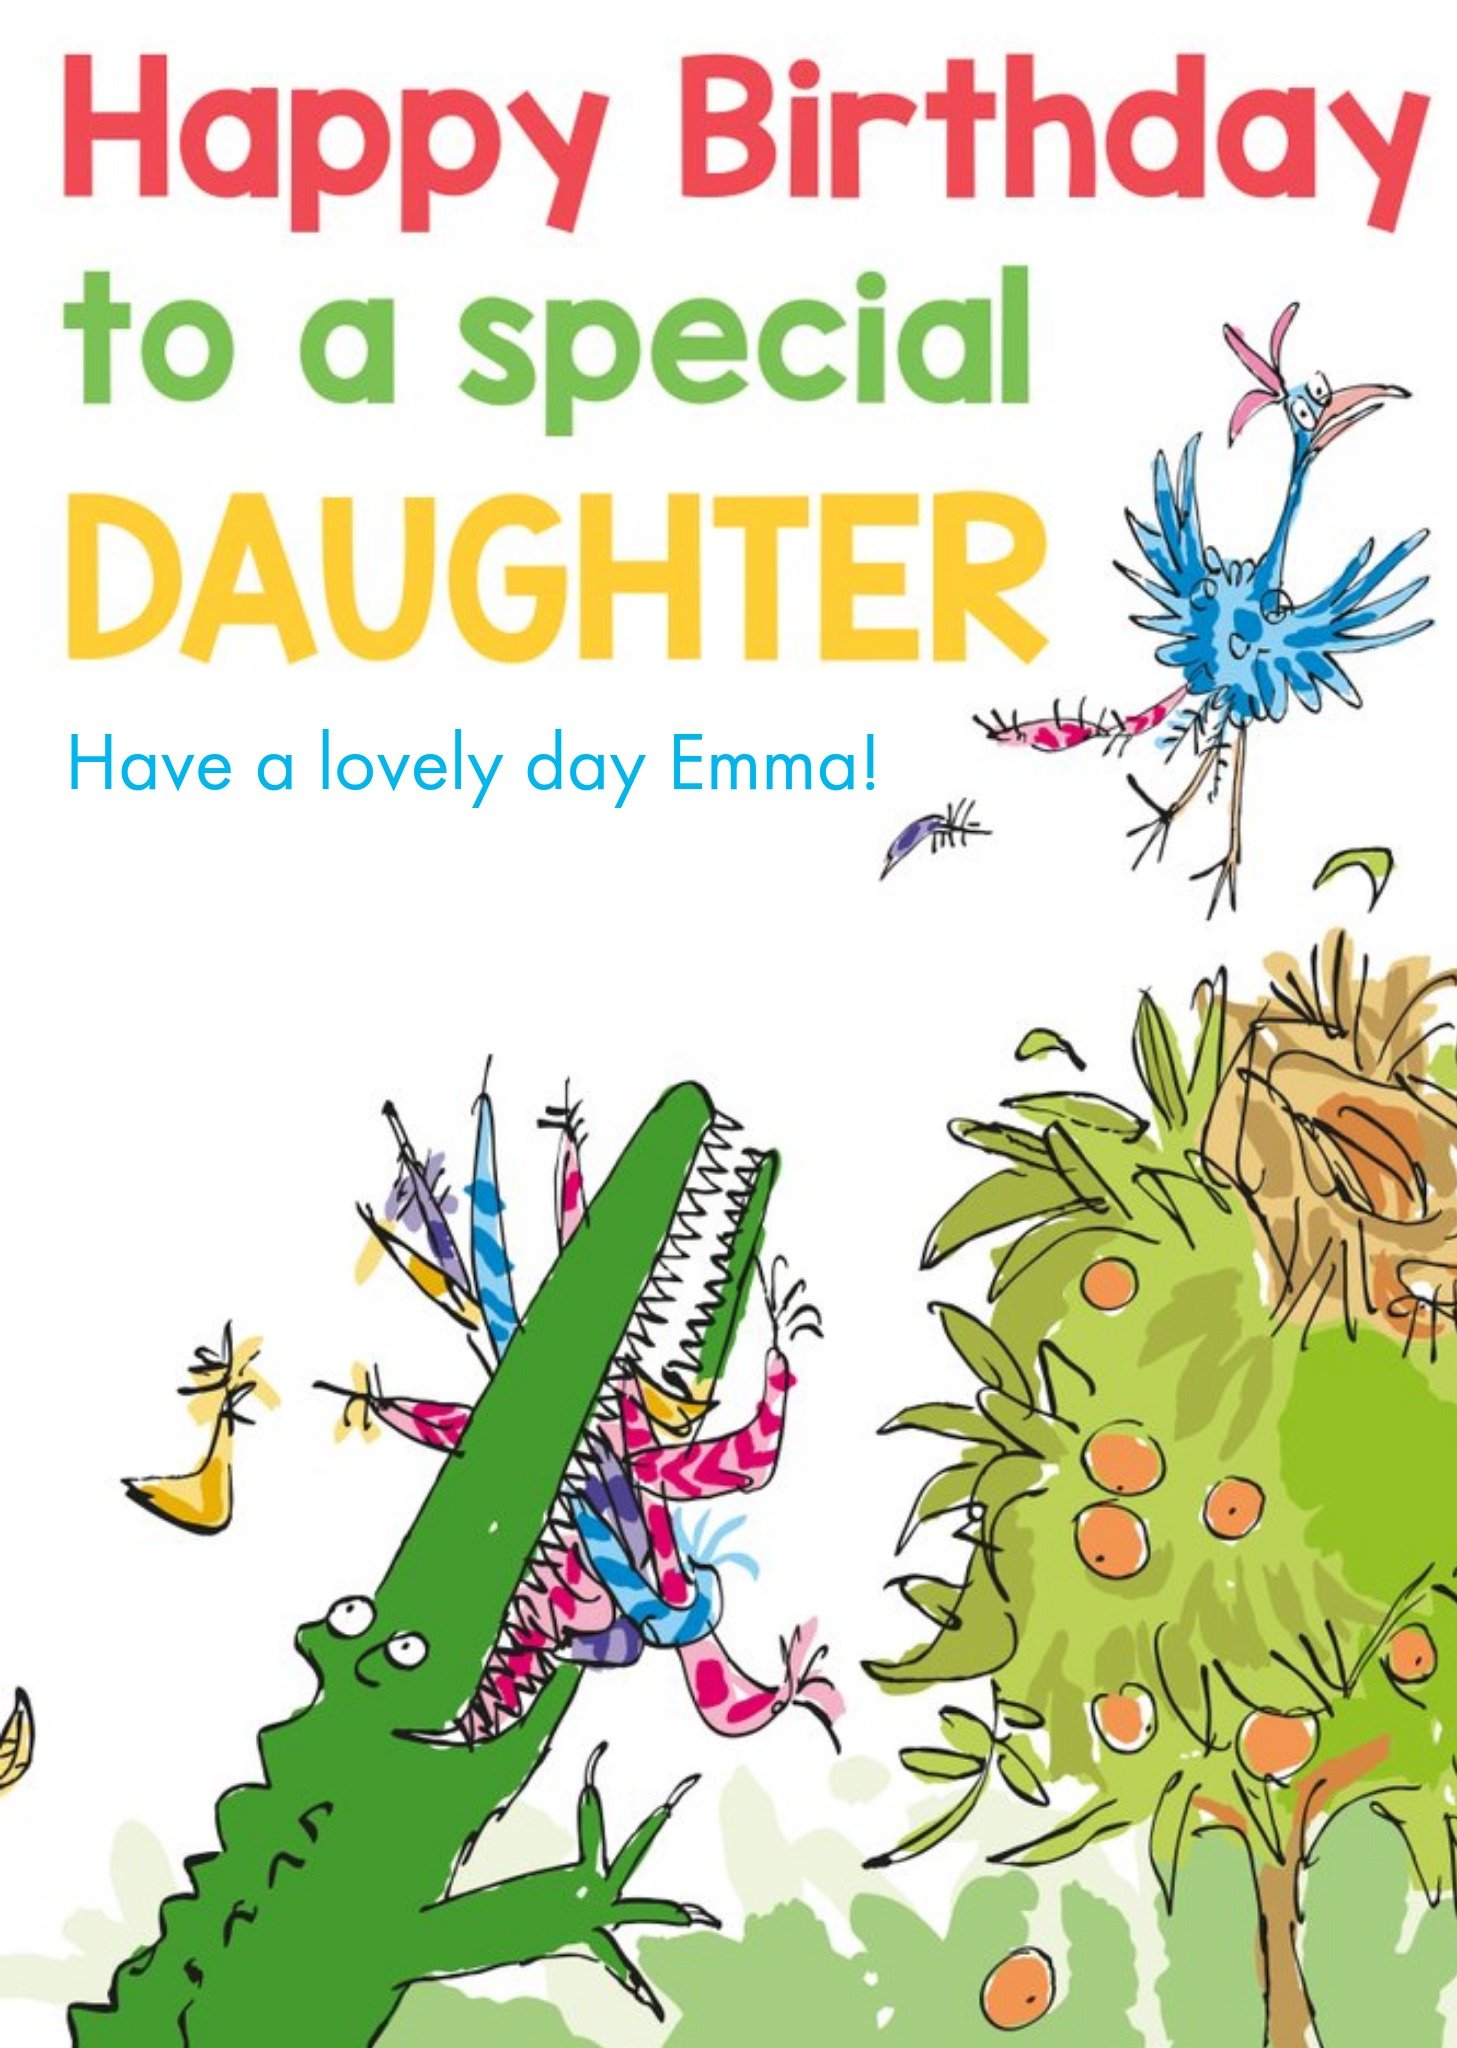 Moonpig Roald Dahl The Enormous Crocodile Special Daughter Birthday Card, Large